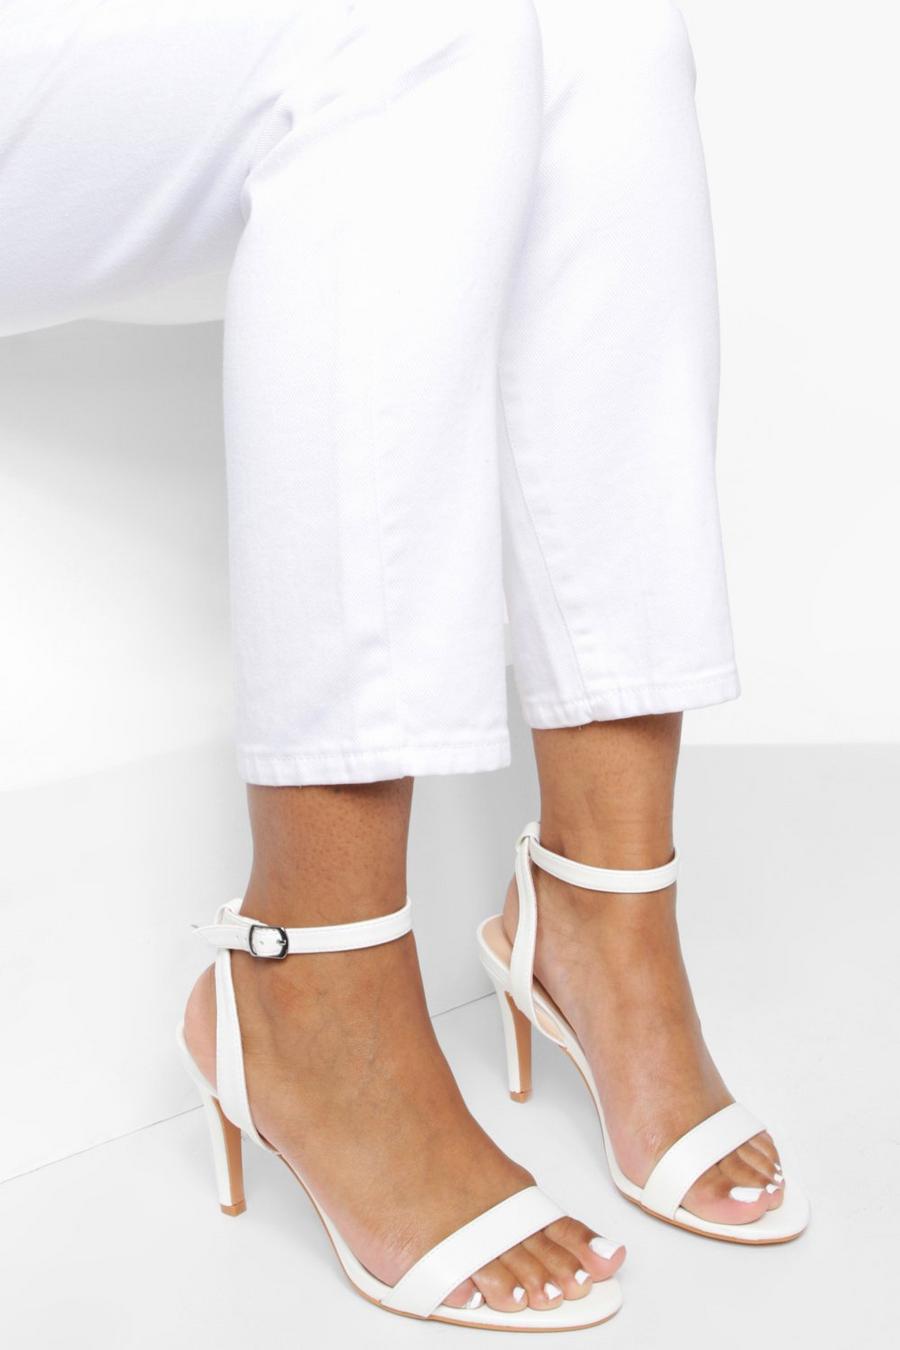 White blanco Low Barely There Heels